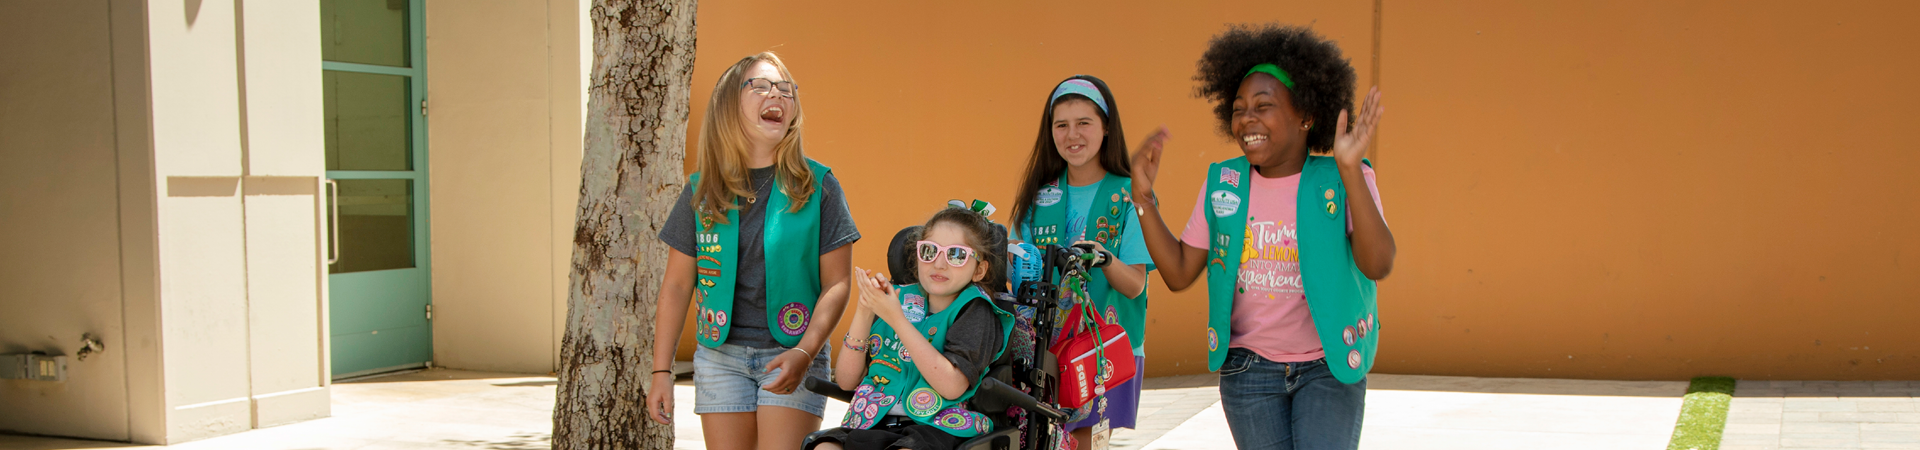  Group of Girl Scouts smiling at each other outdoors 